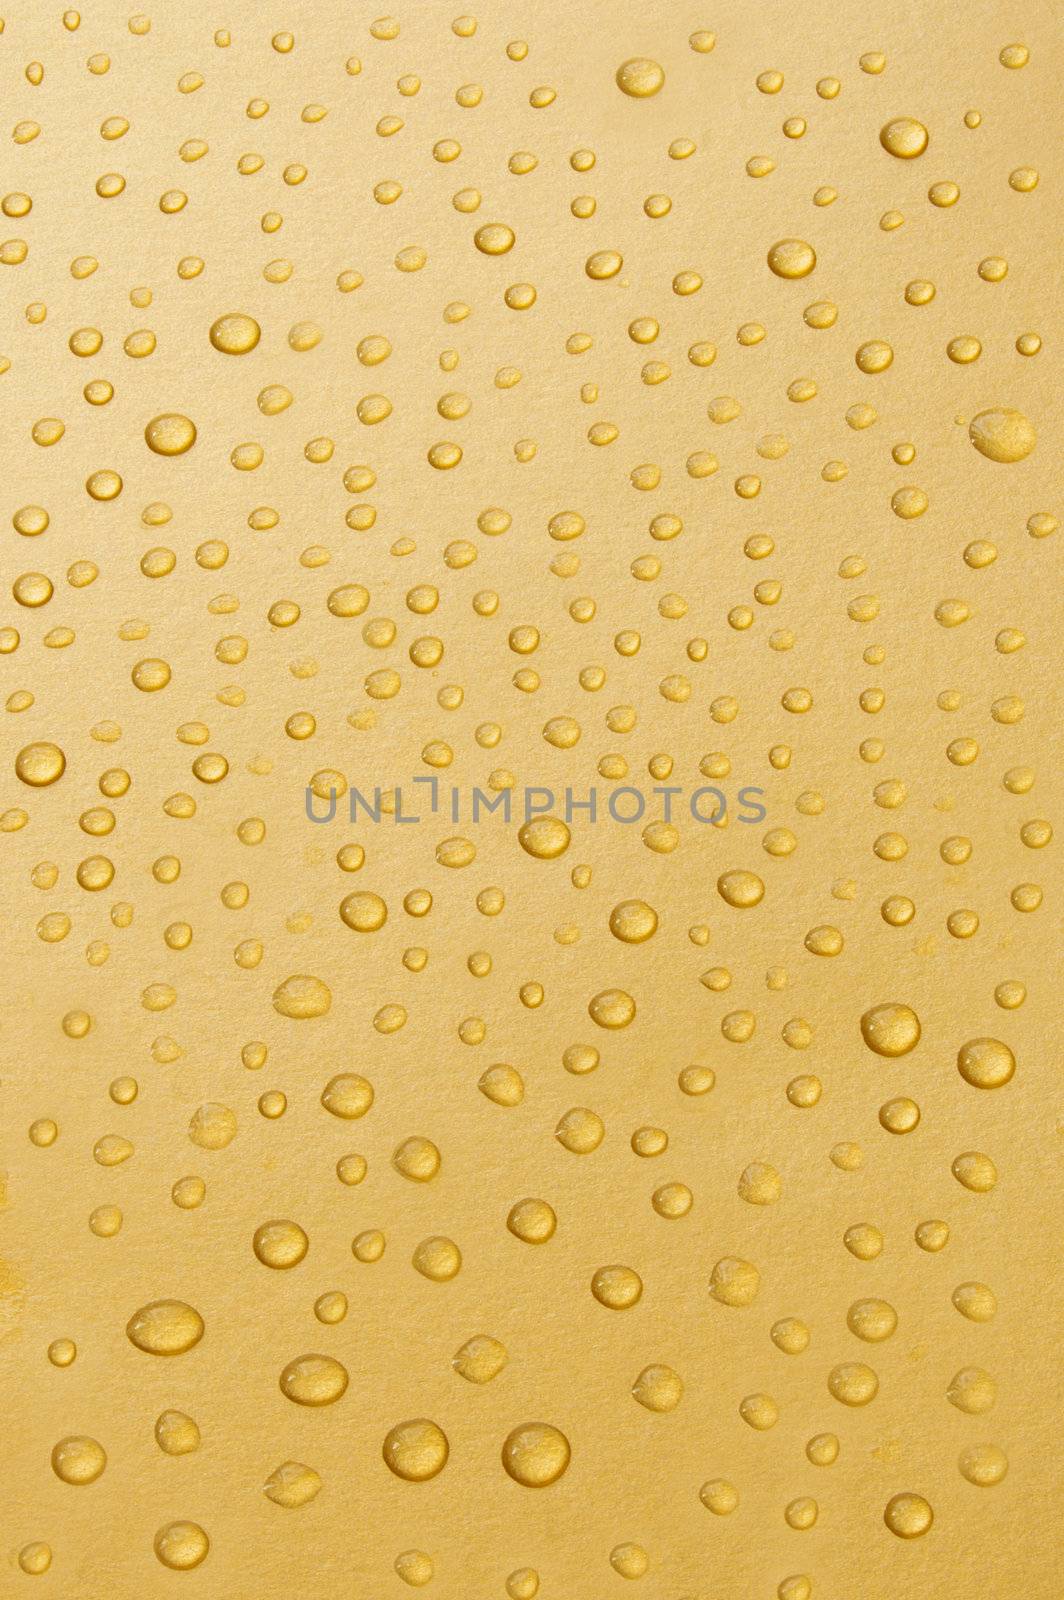 Closeup image of water droplets on a gold background